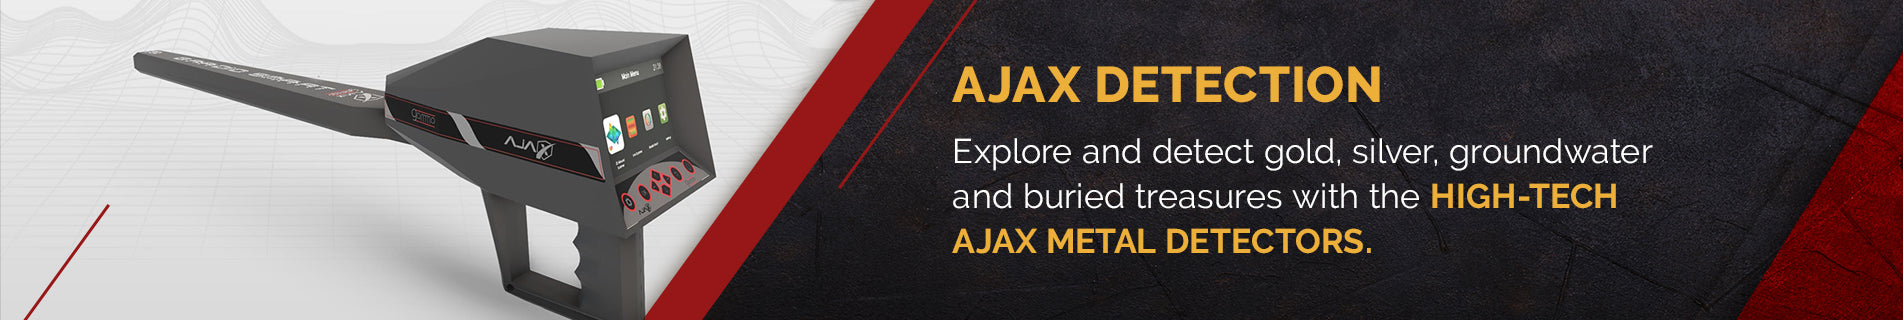 AJAX Detection Metal Detectors| Free US Shipping | Secure Payment